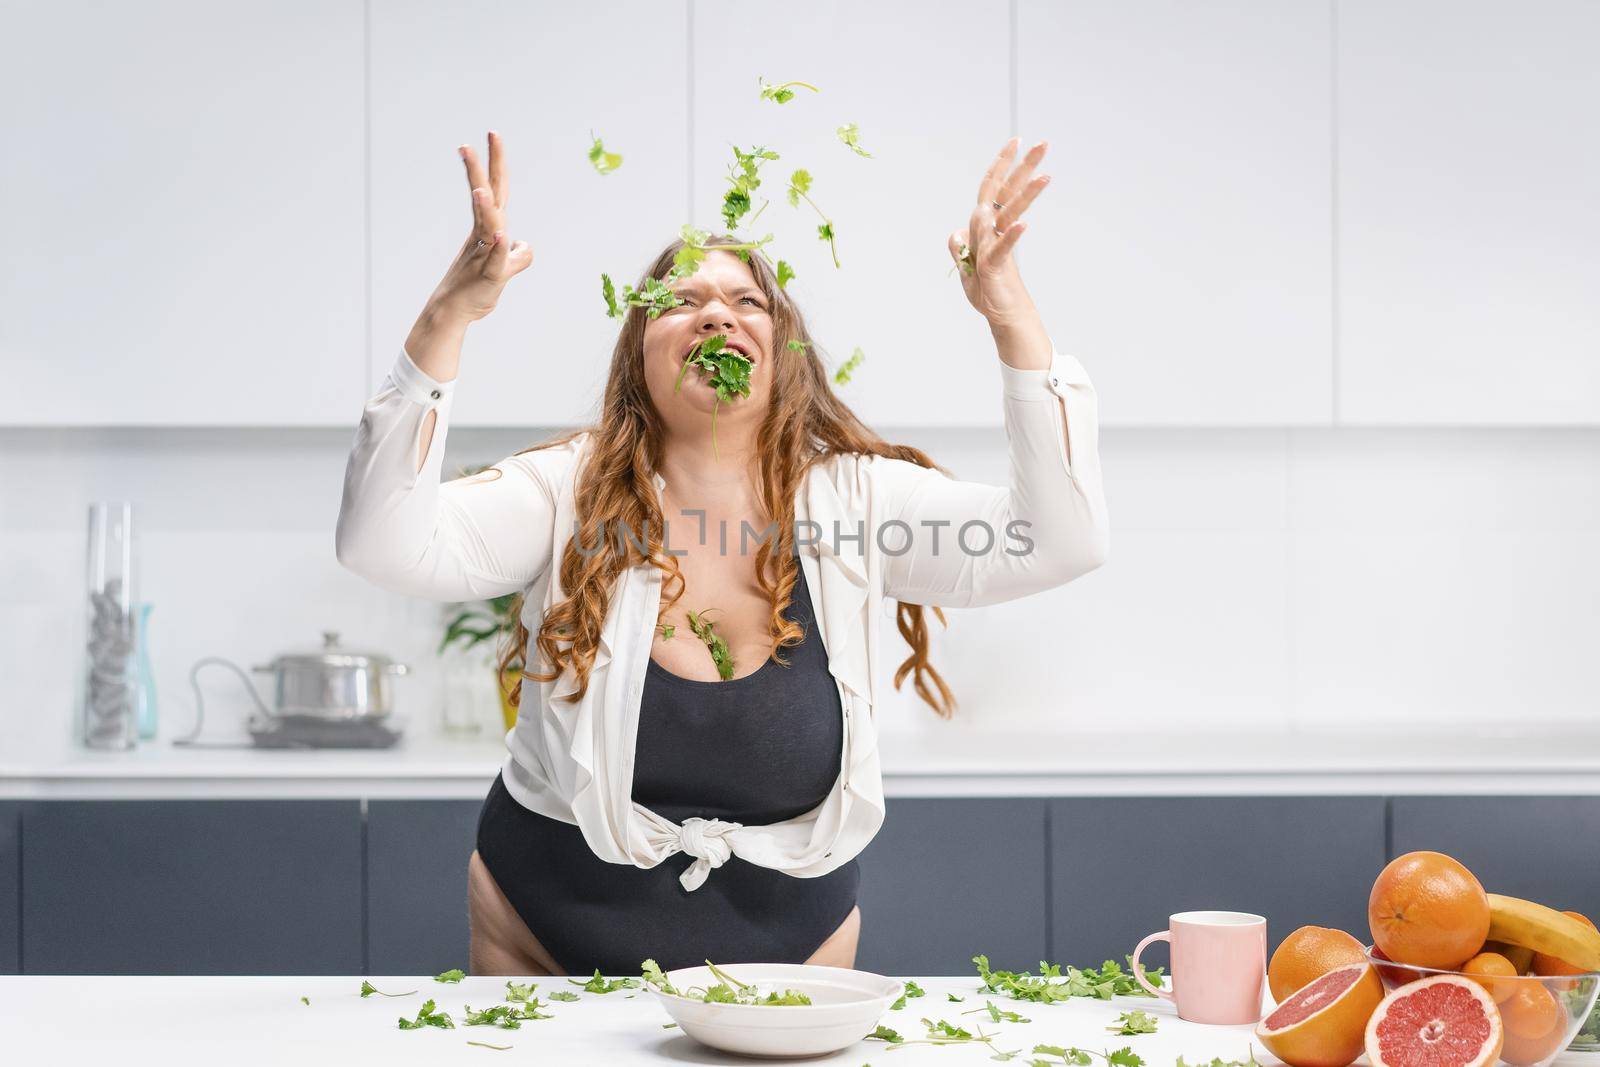 Happy chubby girl scattering spinach leaves all over the table. Overweight girl happy loosing weight eating fresh salad. Curvy body young woman with long blond hair. Dieting and nutrition concept by LipikStockMedia